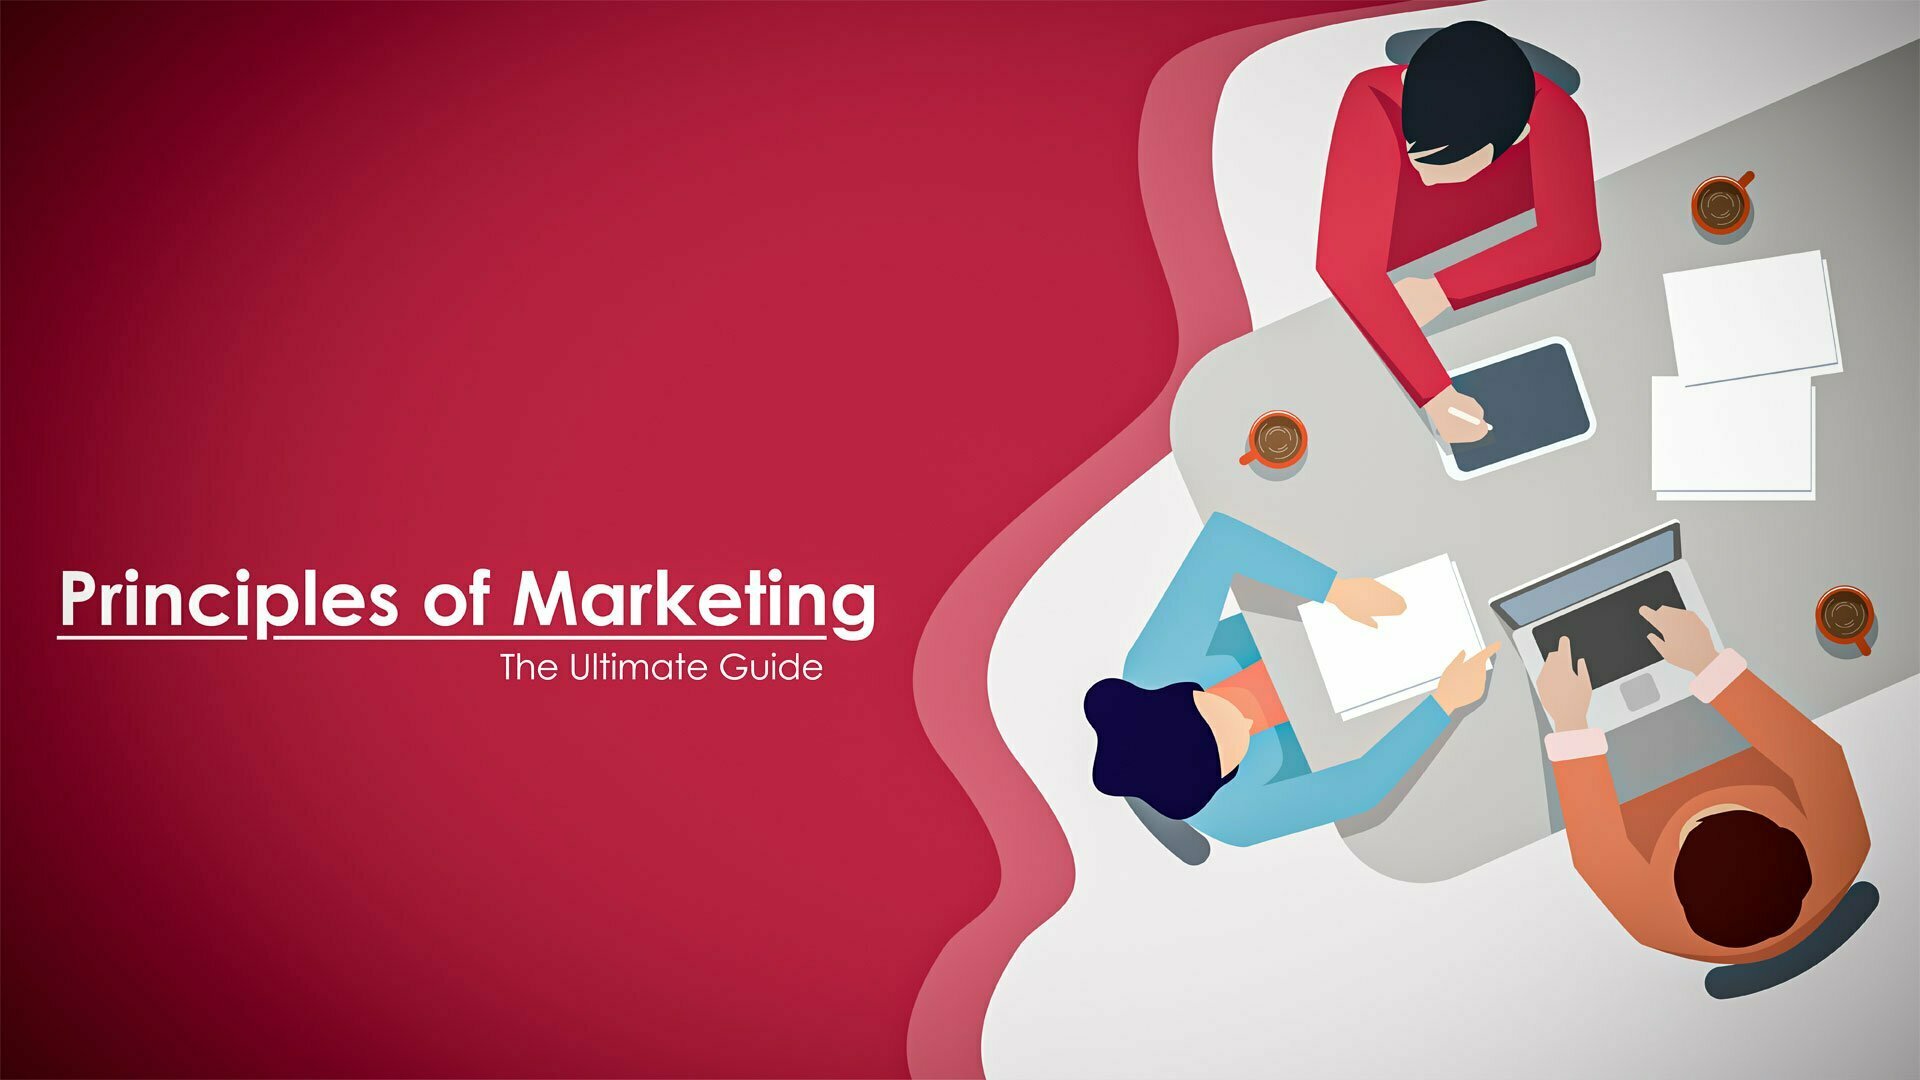 The ultimate guide to Principles of Marketing